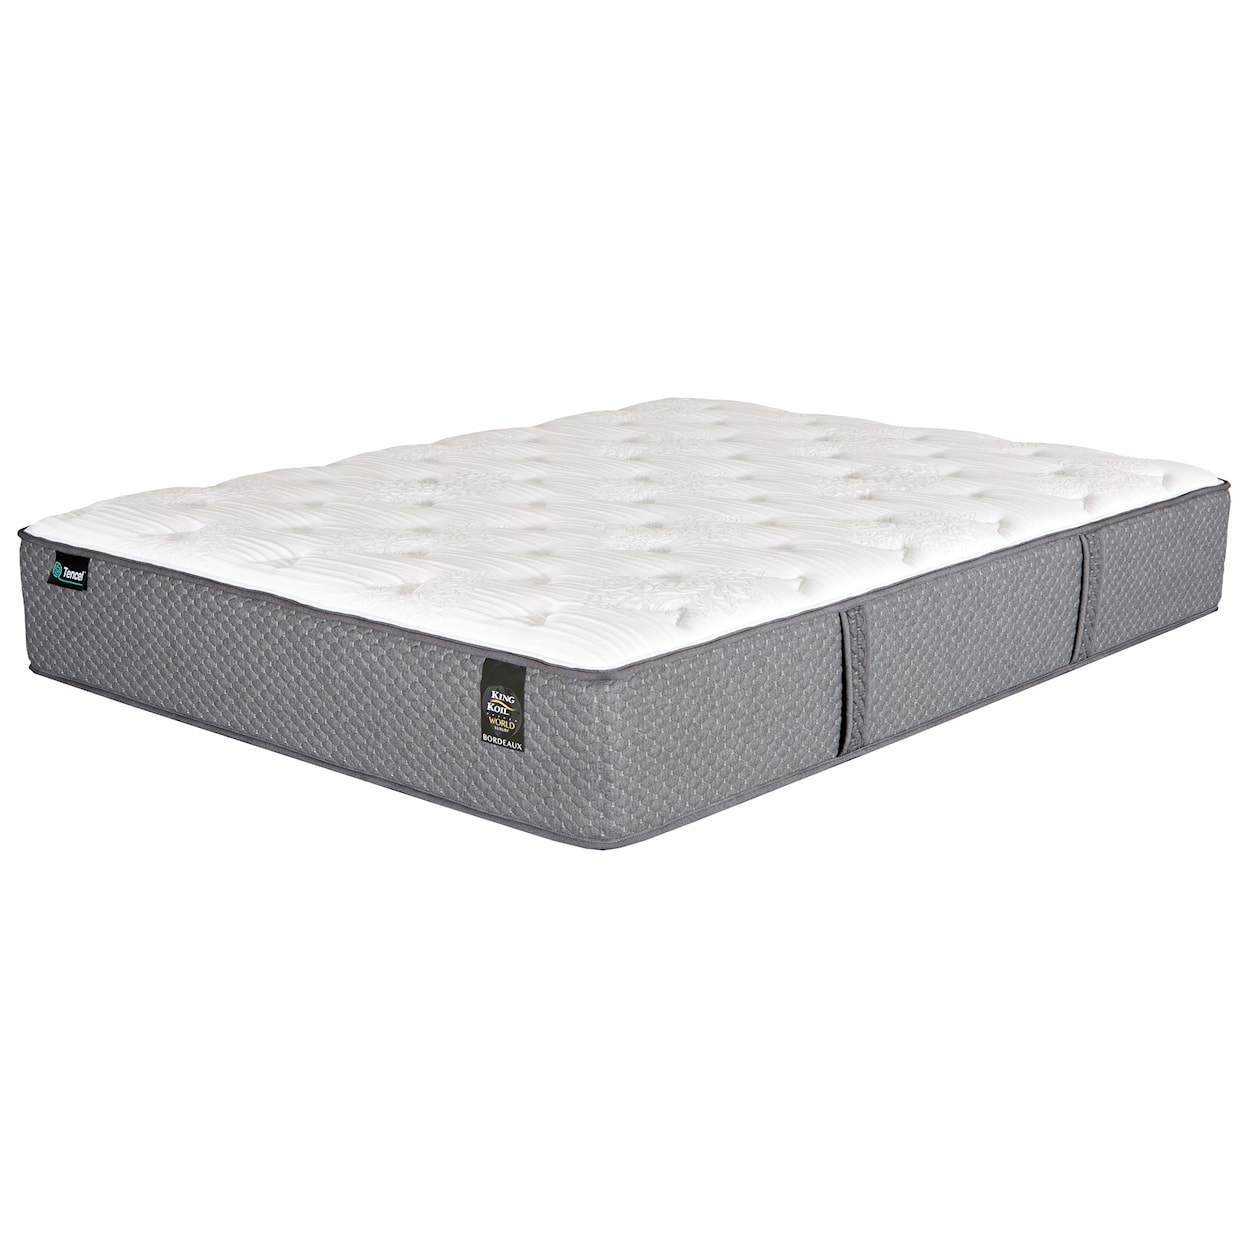 King Koil Beaumont P Twin XL Pocketed Coil Mattress